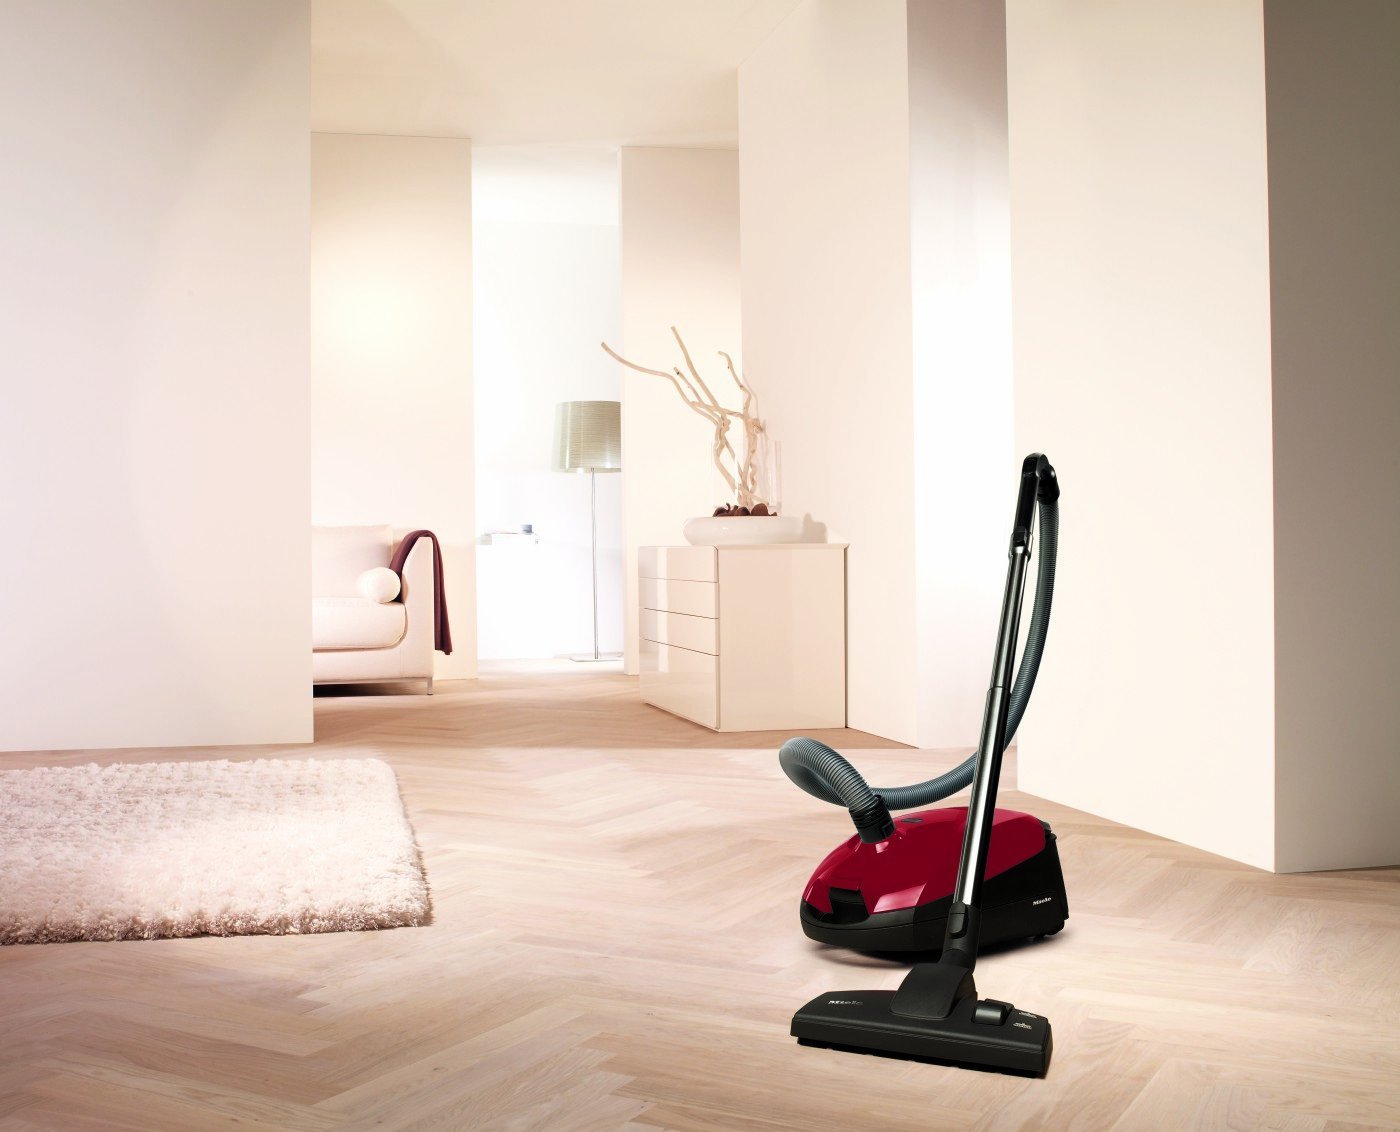 Vacuum Cleaners Facilitate Healthy Living